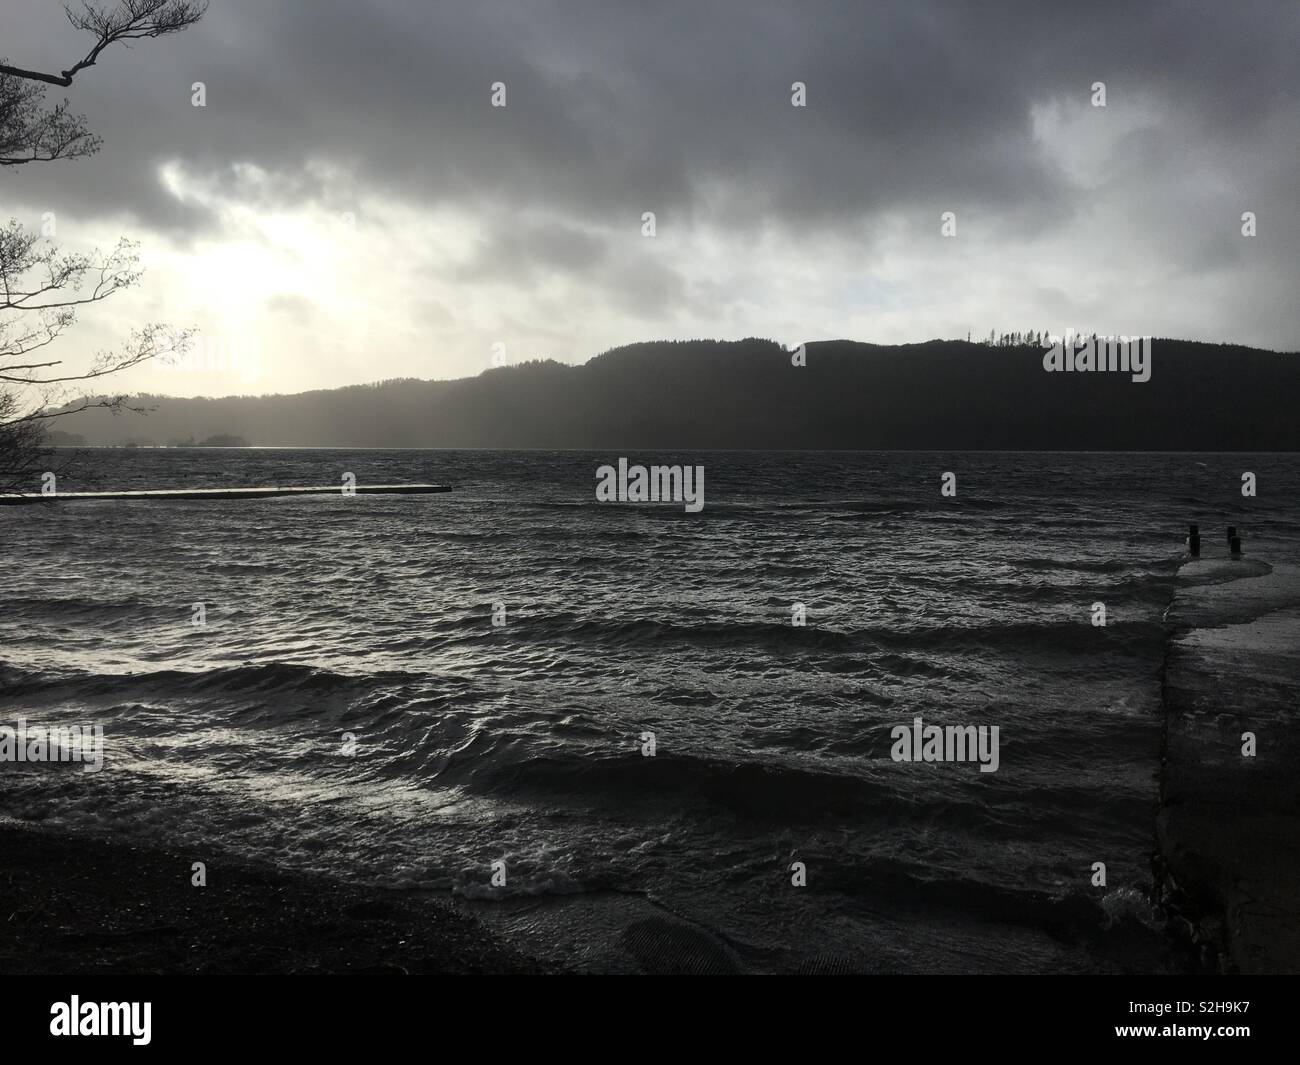 Lake Windermere on a windy day Stock Photo